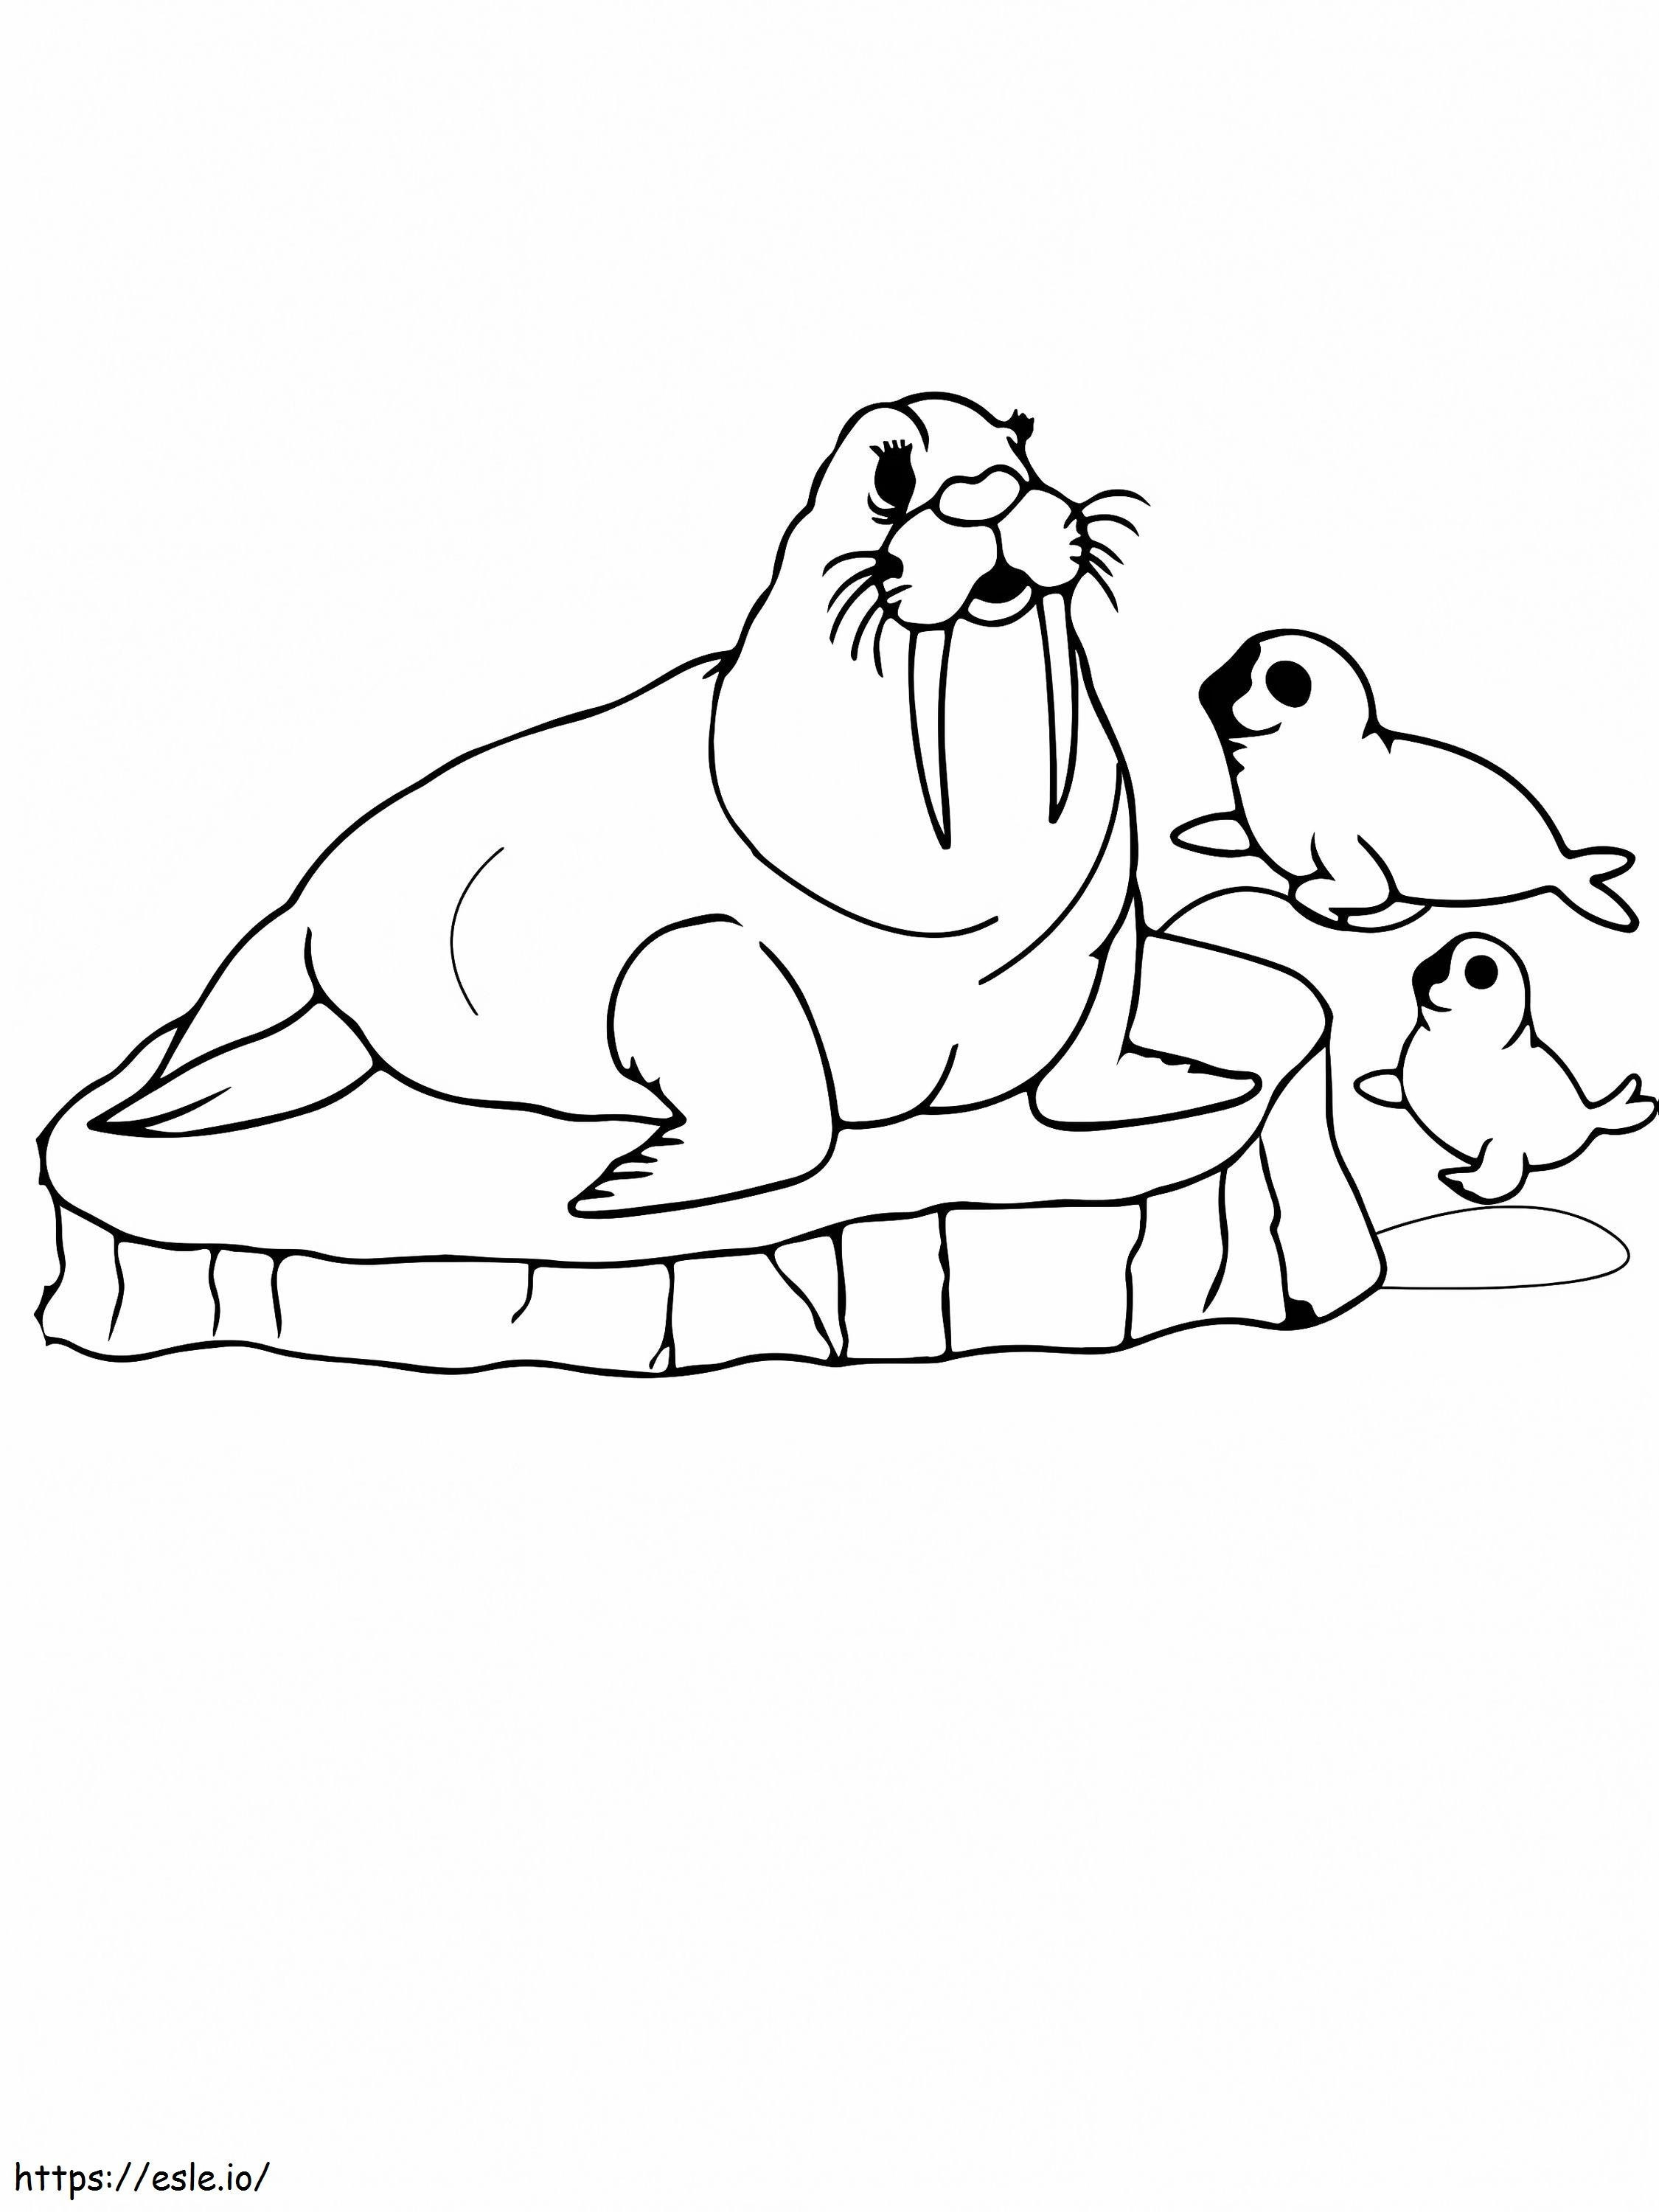 Walrus And Calves Arctic Animals coloring page